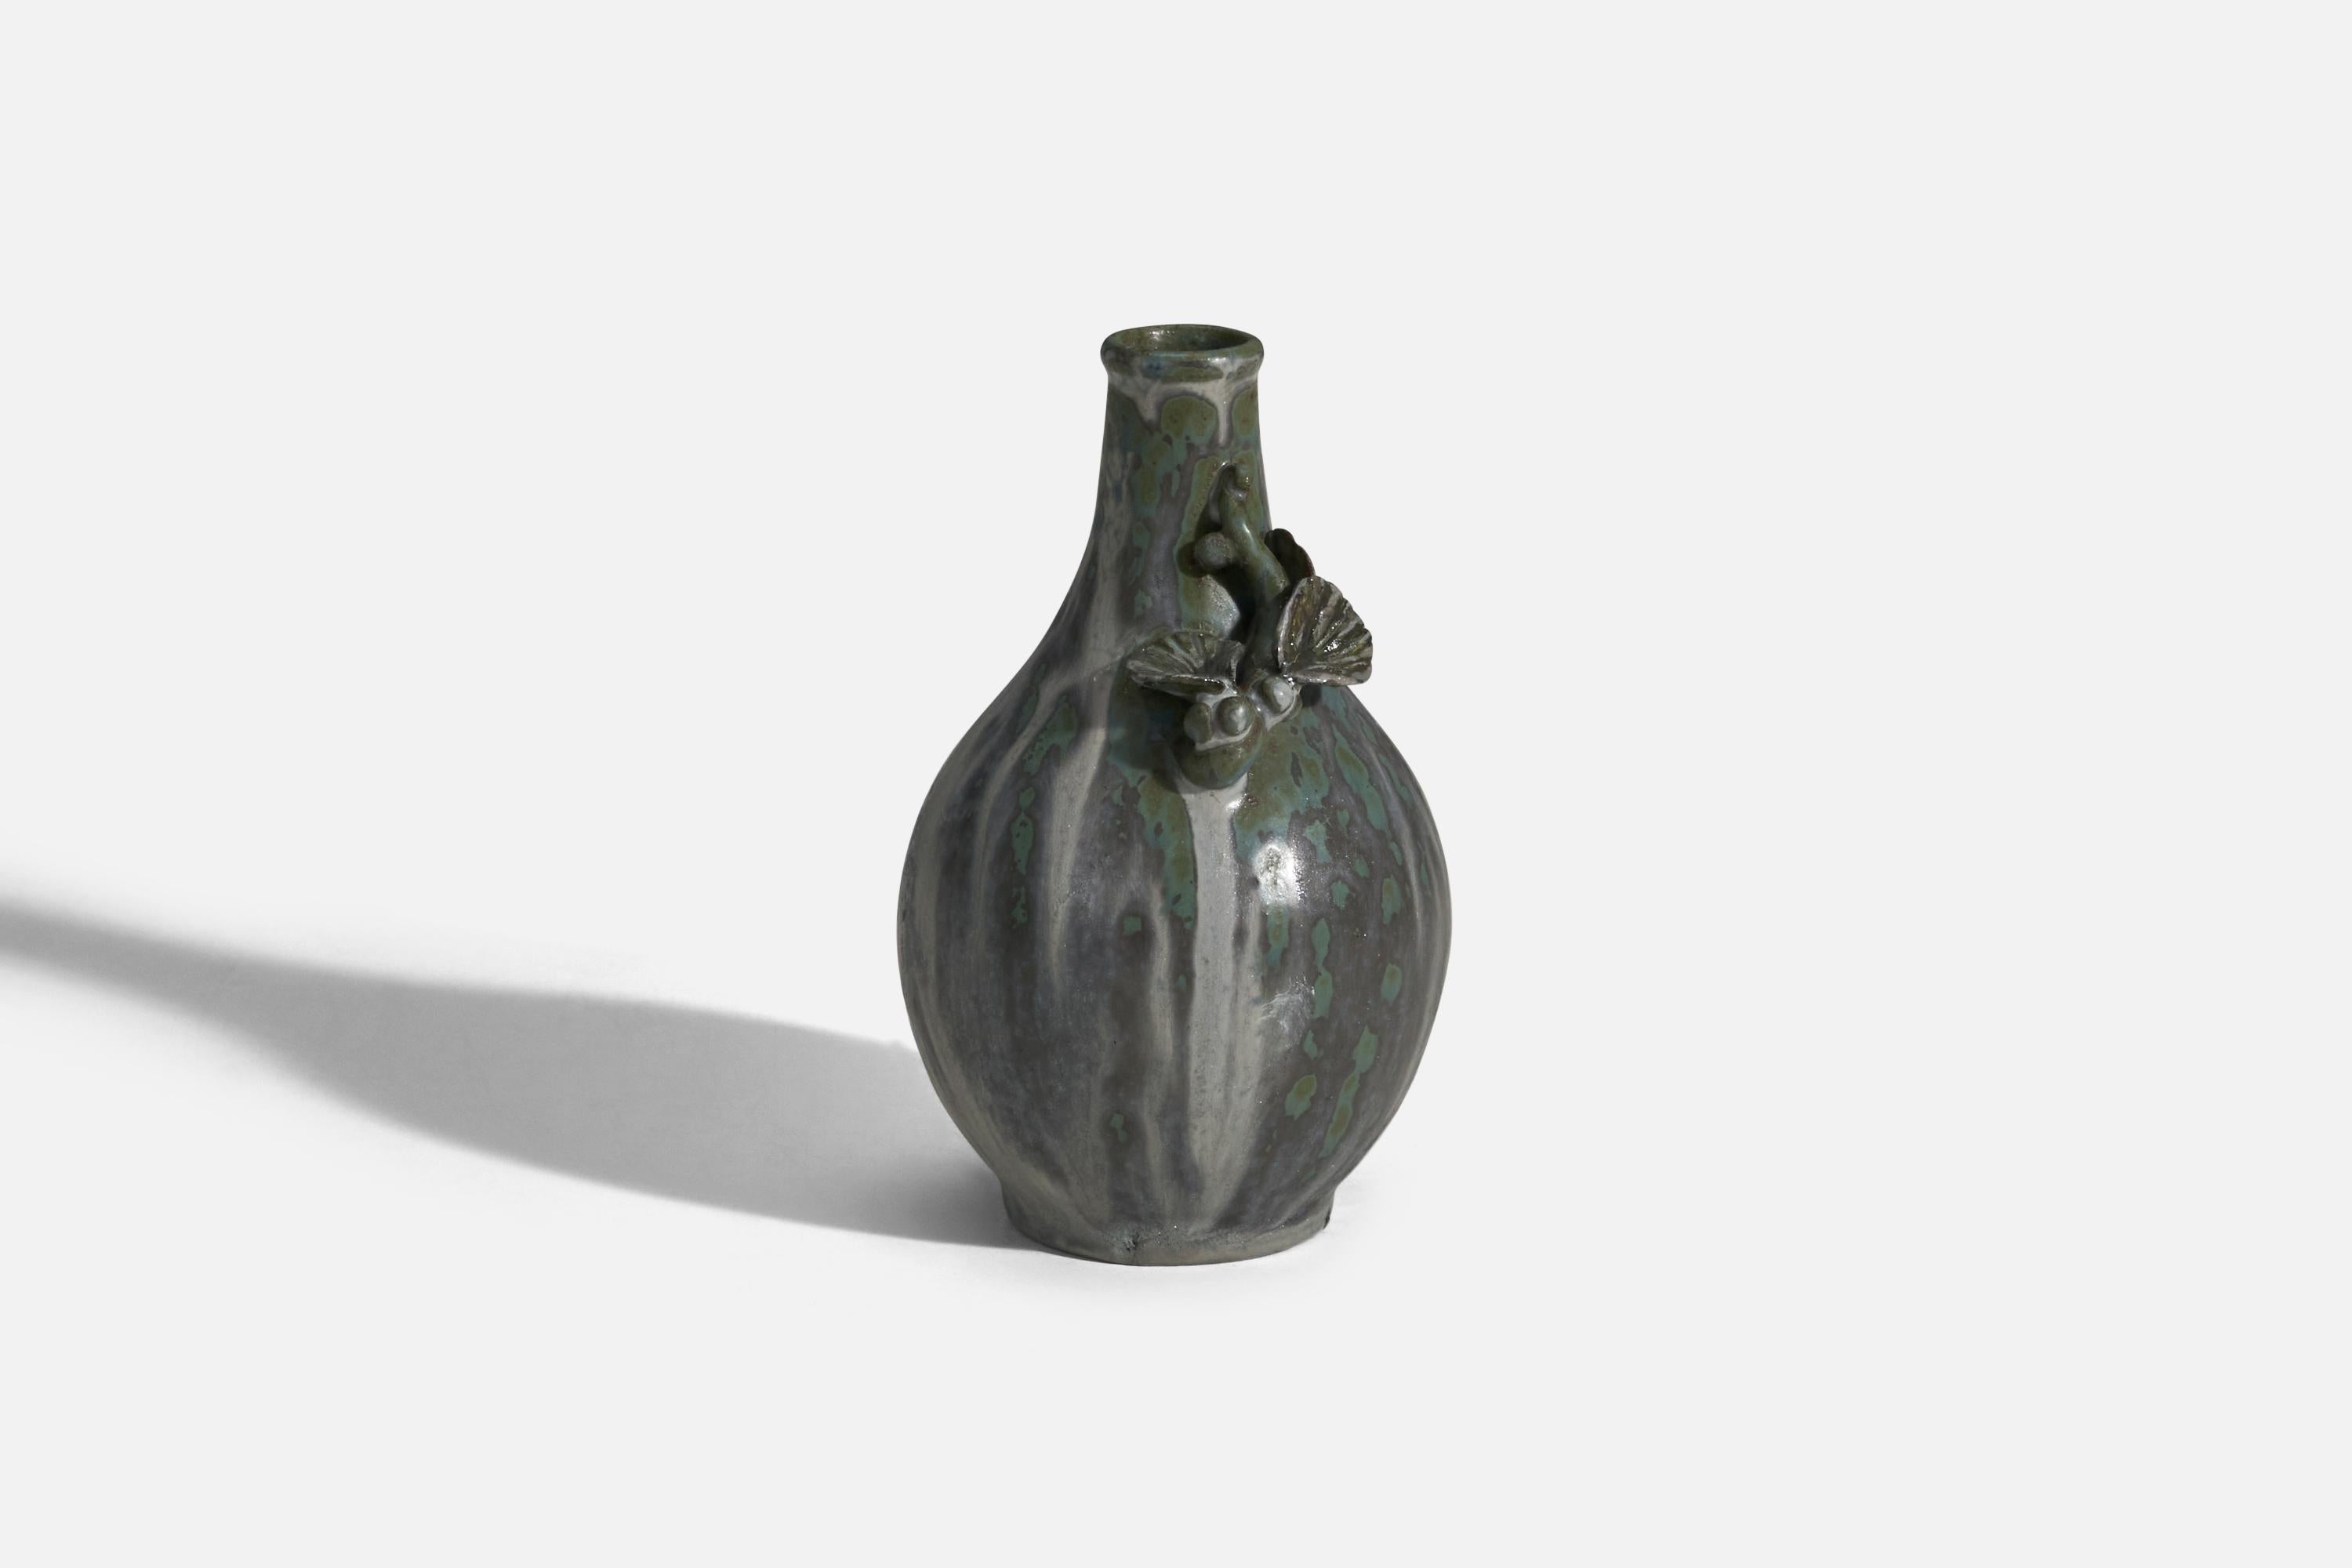 A grey and green glazed stoneware vase designed and produced by Arne Bang, Denmark, 1940s.